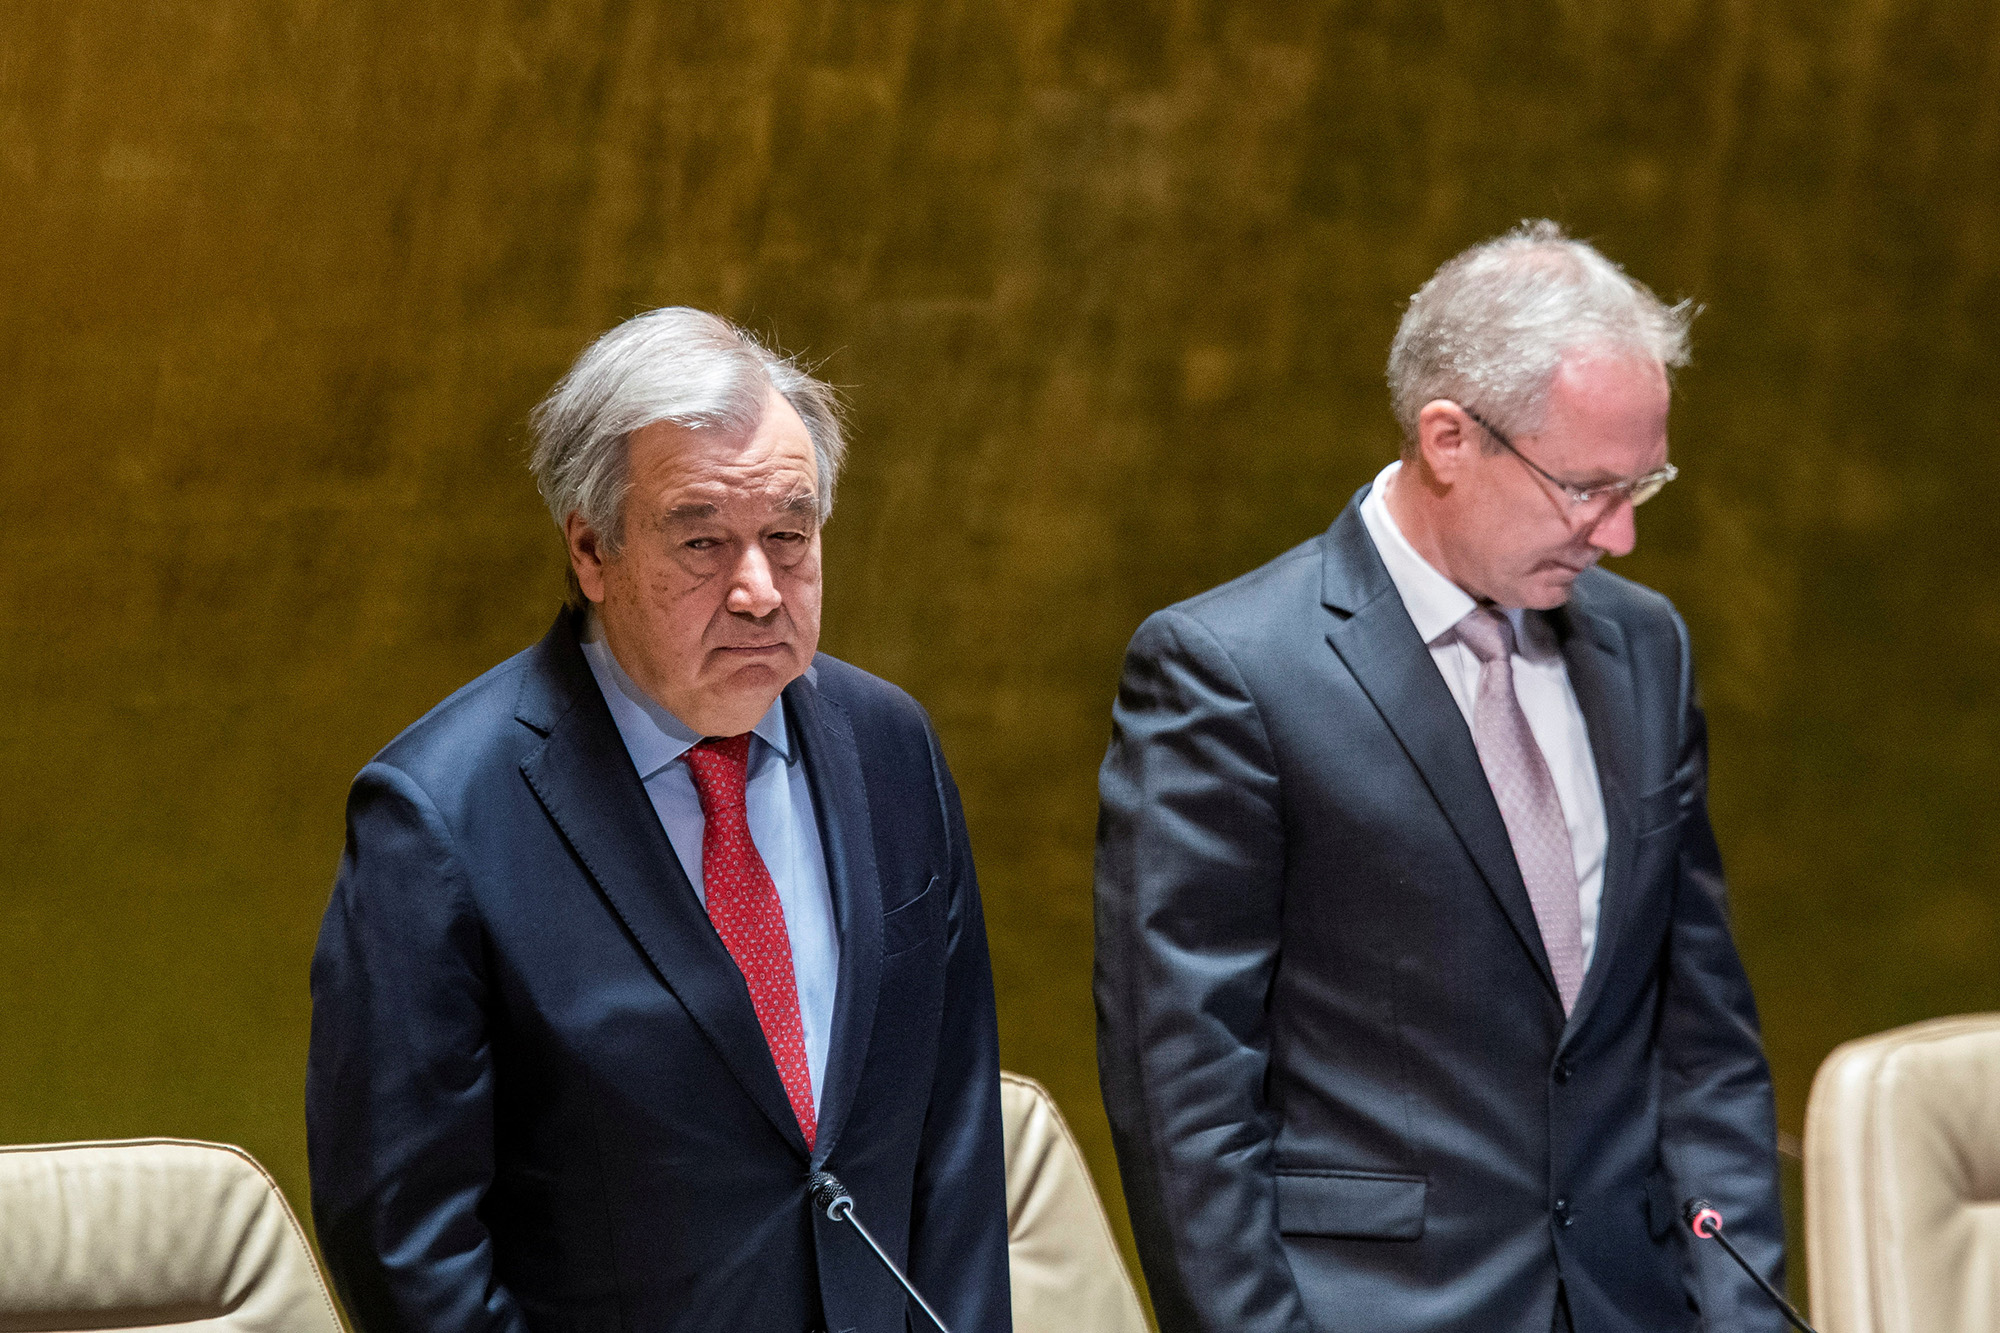 United Nations Secretary General Antonio Guterres, left, attends a minute of silence for the victims of the earthquake in Turkey and Syria during the 58th plenary meeting at the United Nations headquarters in New York, U.S., on February 6.